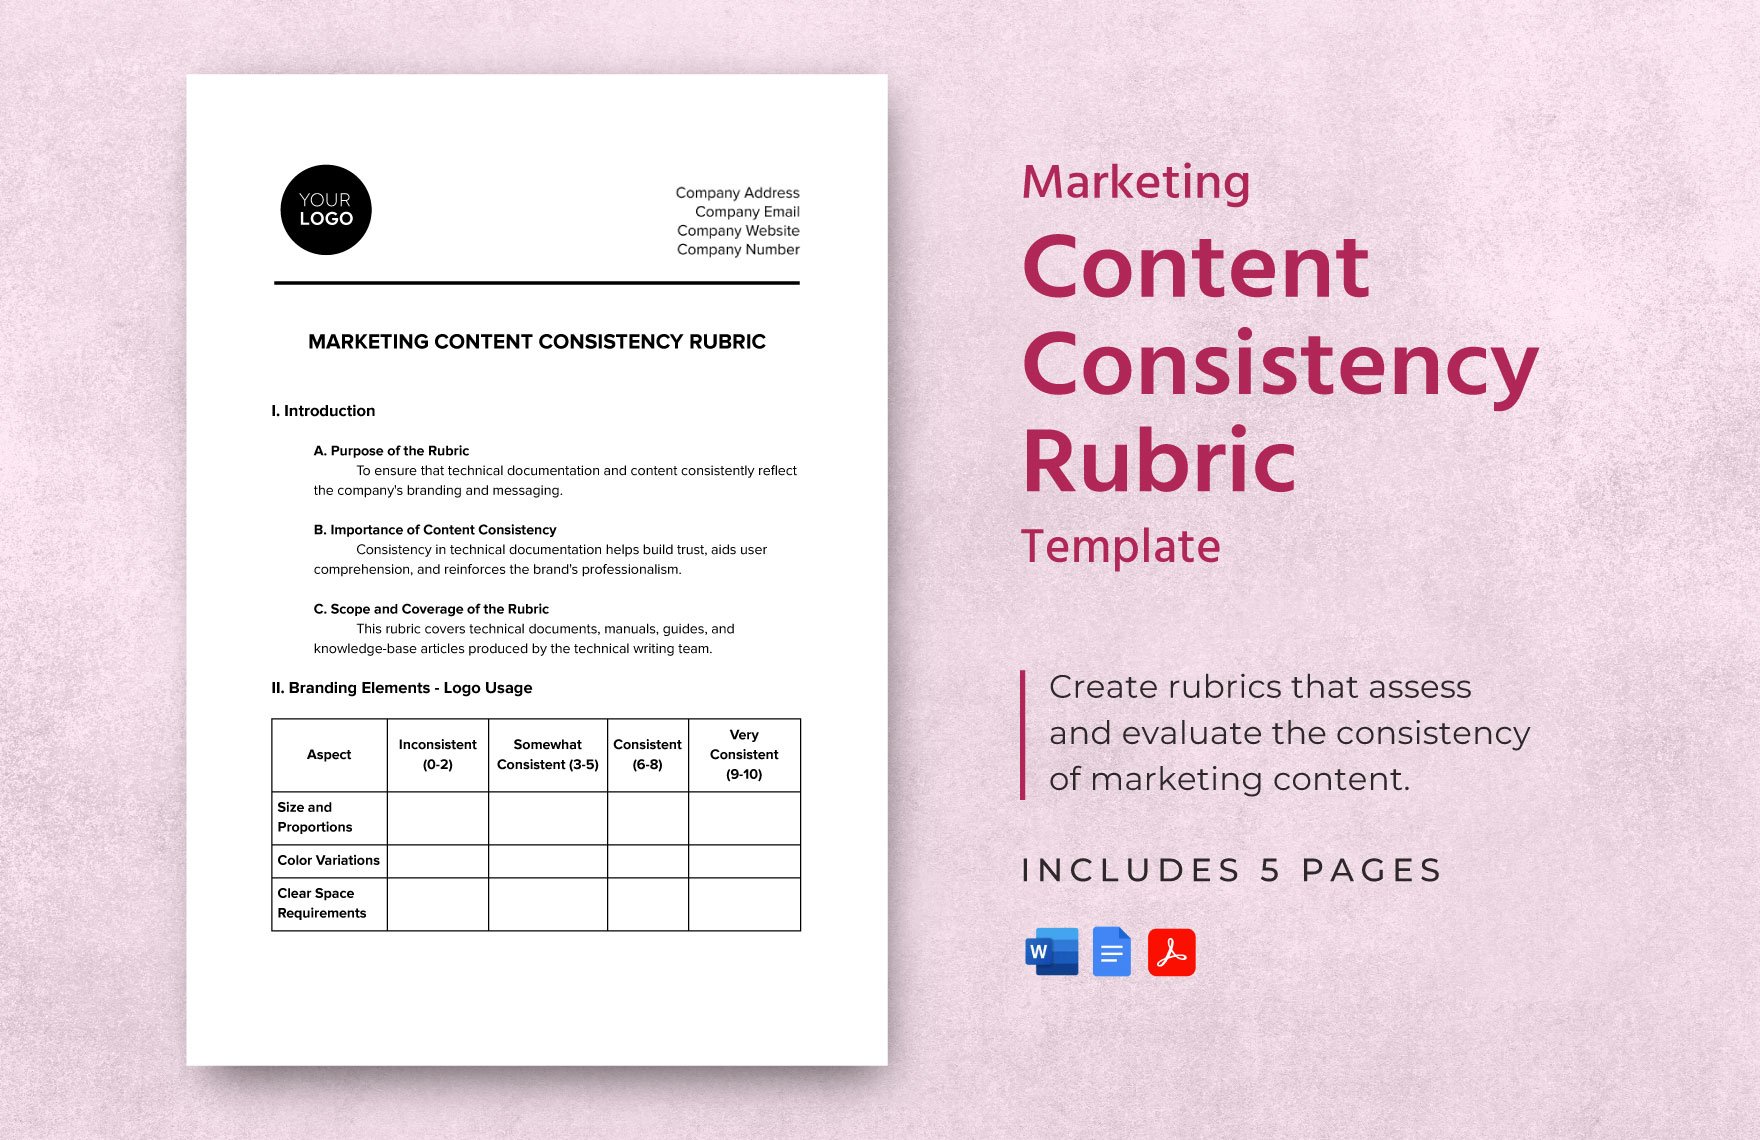 Marketing Content Consistency Rubric Template in Word, Google Docs, PDF